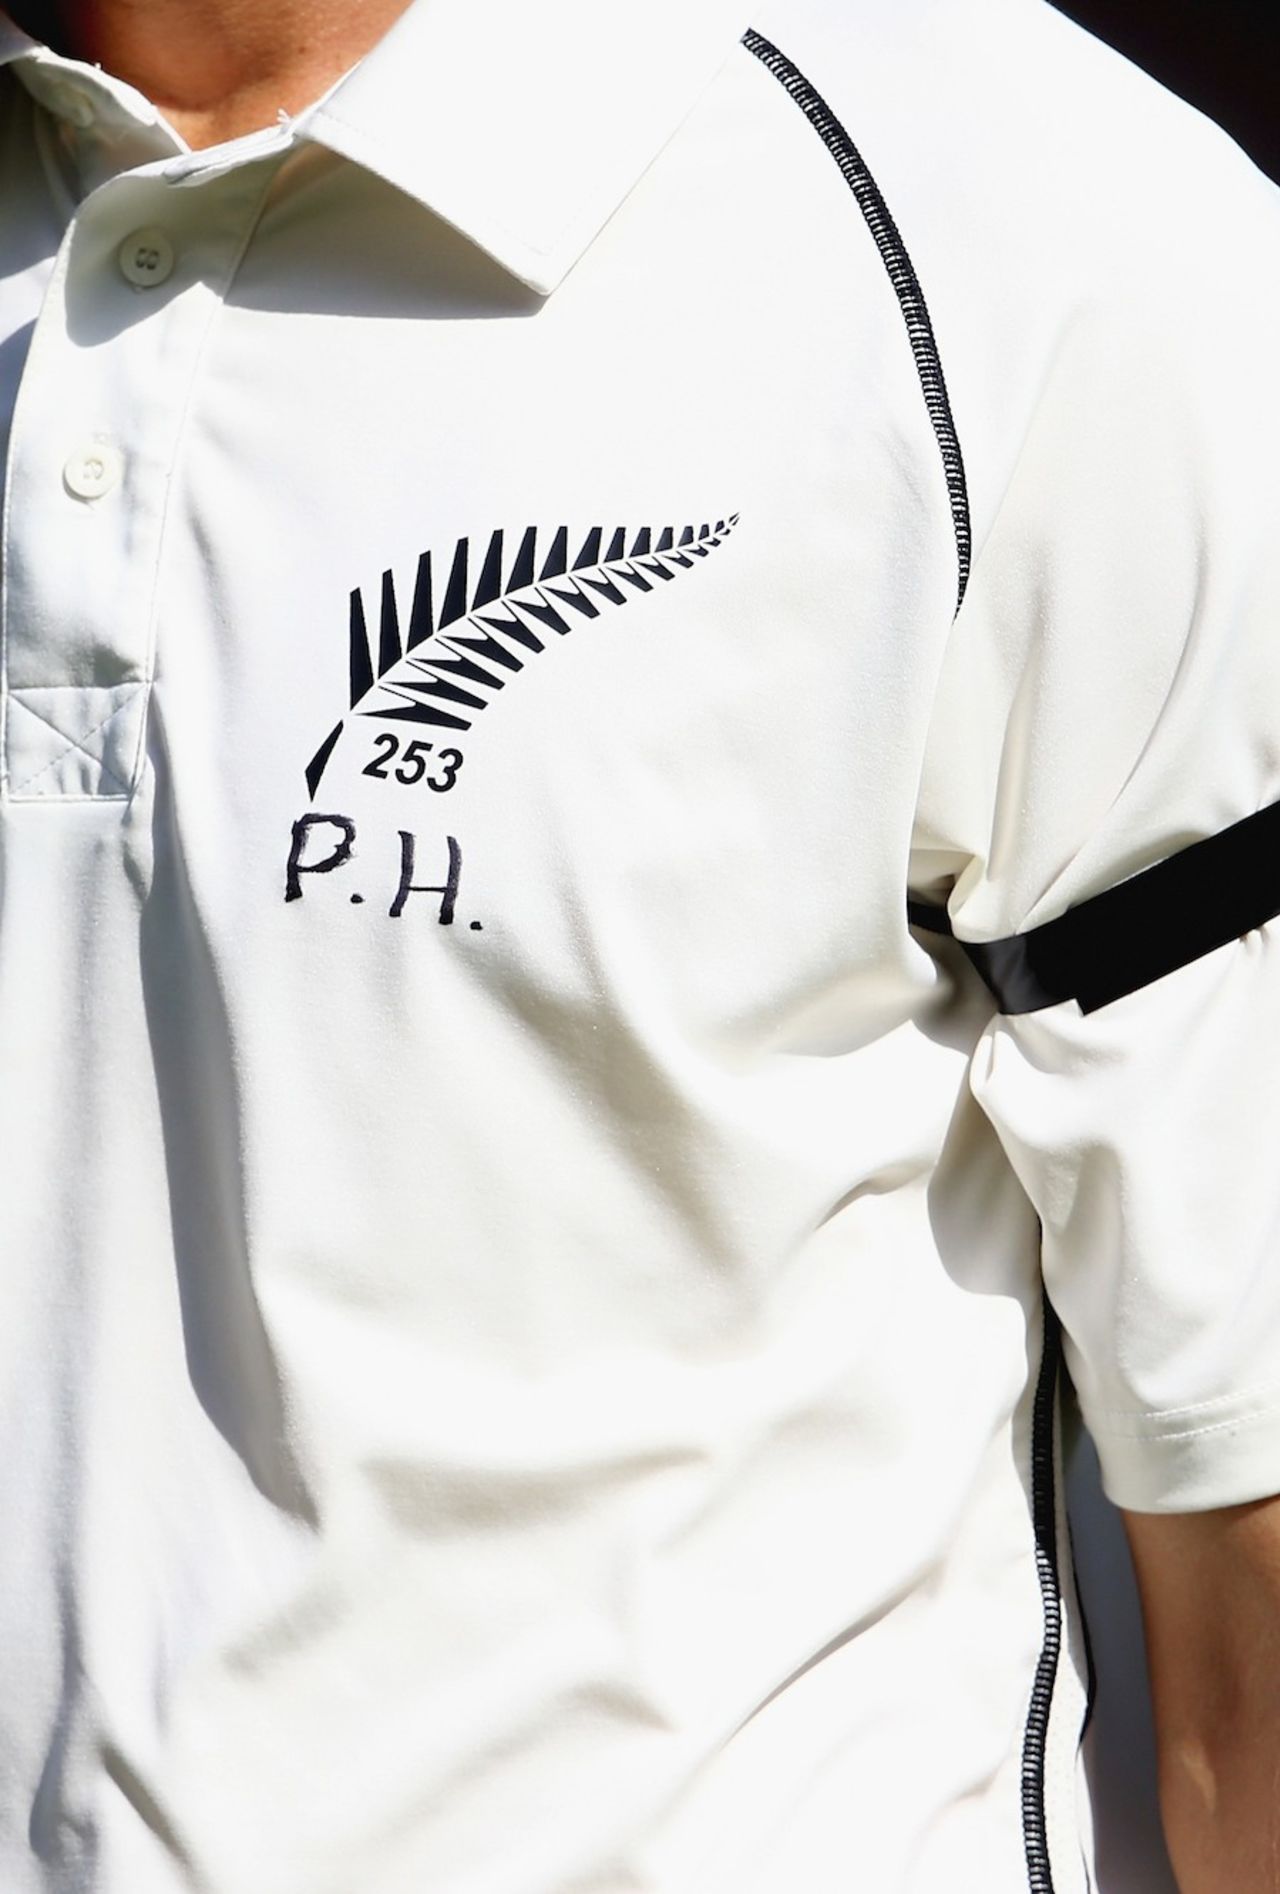 A New Zealand cricketer with Phillip Hughes' initials on his shirt, Pakistan v New Zealand, 3rd Test, Sharjah, 2nd day, November 28, 2014